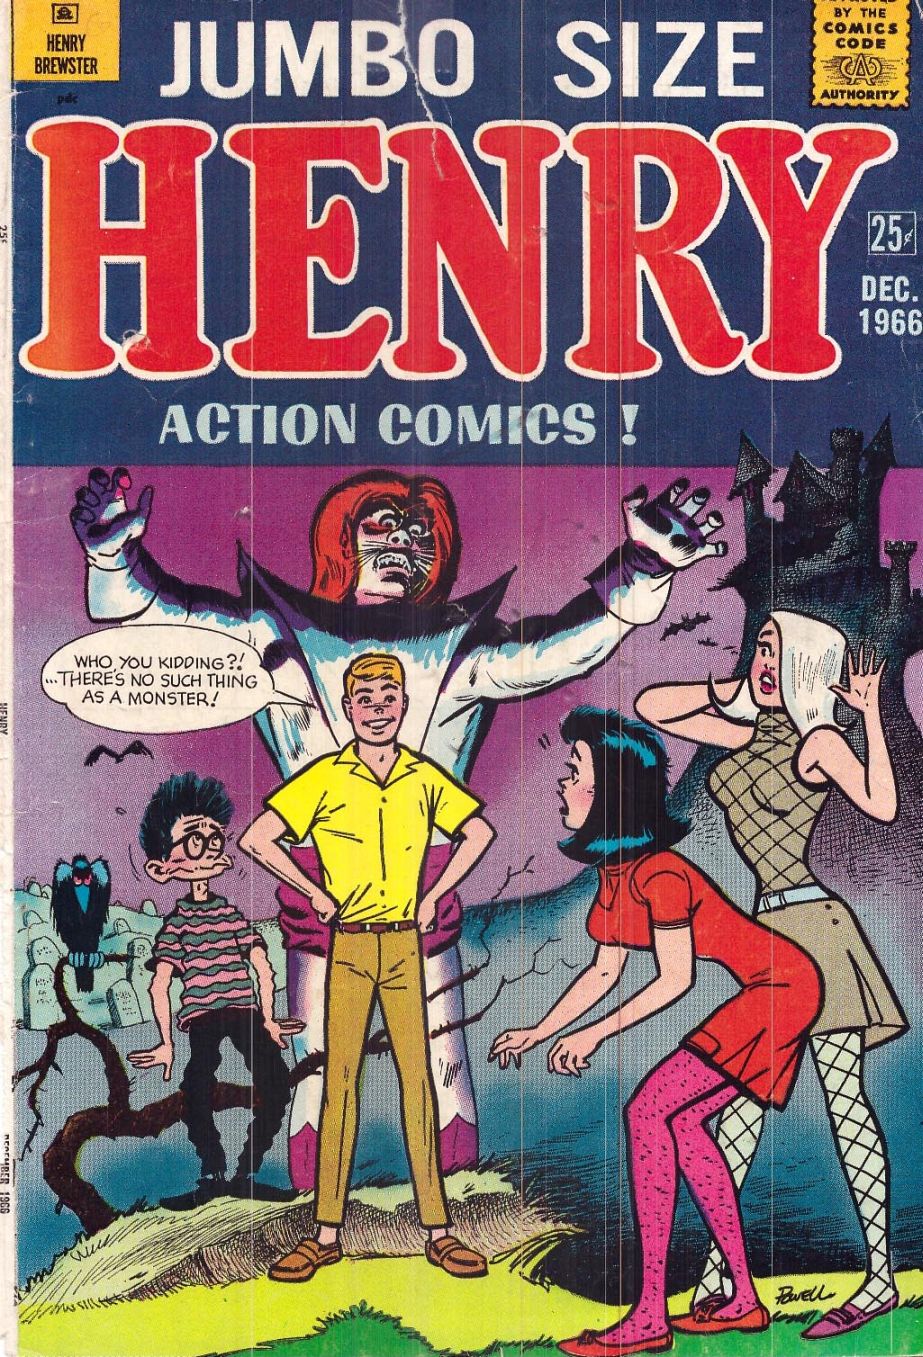 Read online Henry Brewster comic -  Issue #6 - 1